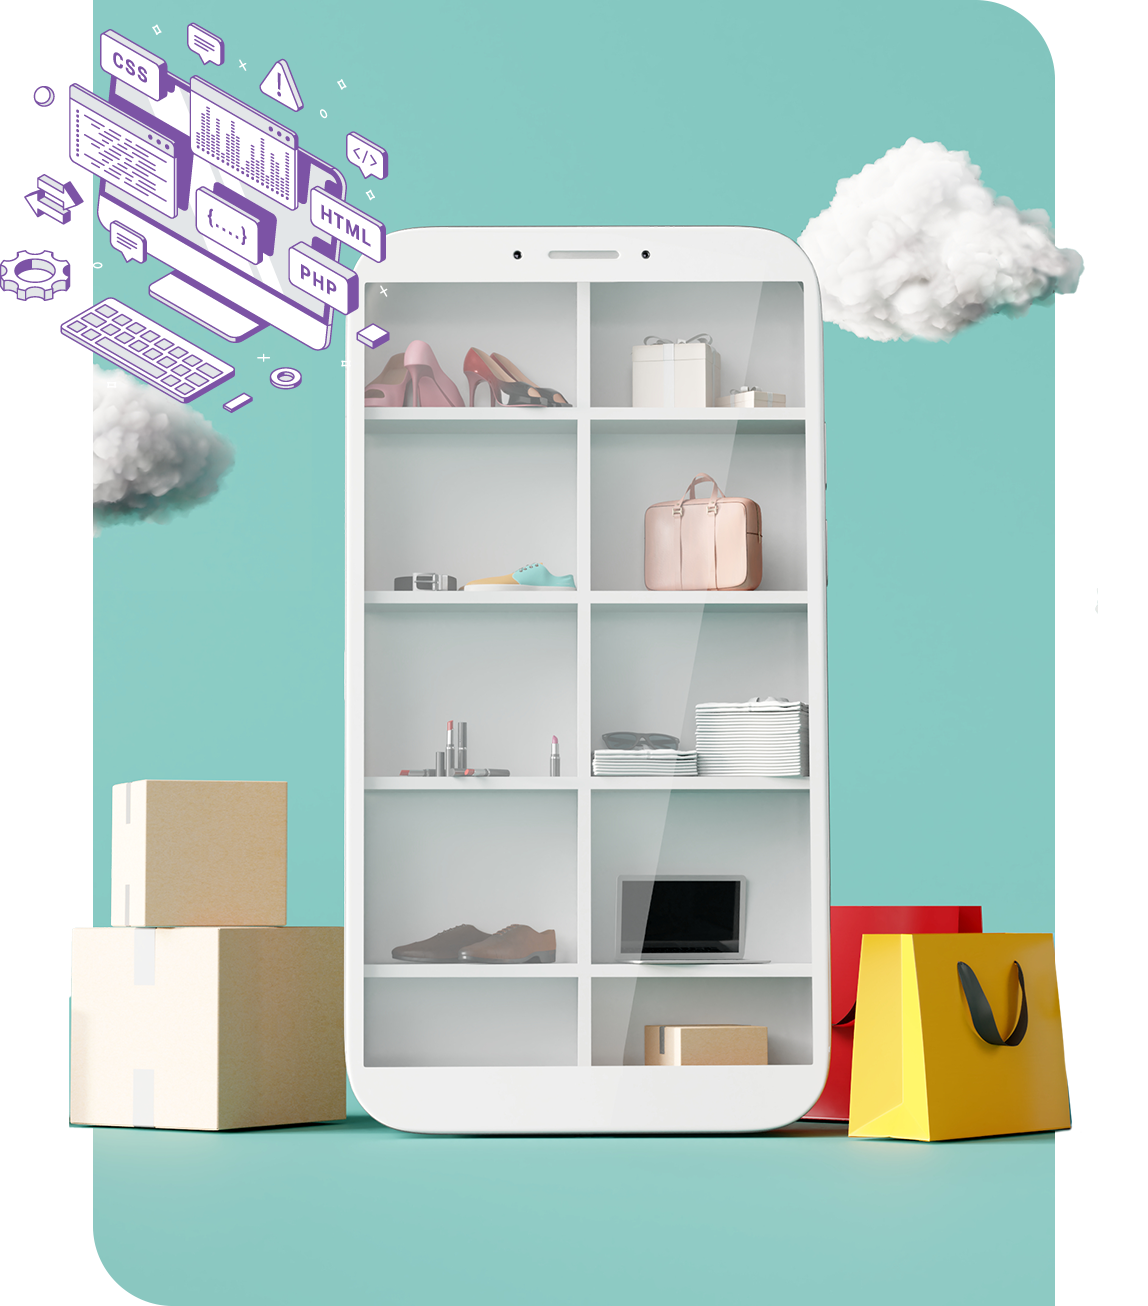 Smartphone accompanied by clouds, shopping bags and packages, with an overlay symbolizing cloud technology and digital IT